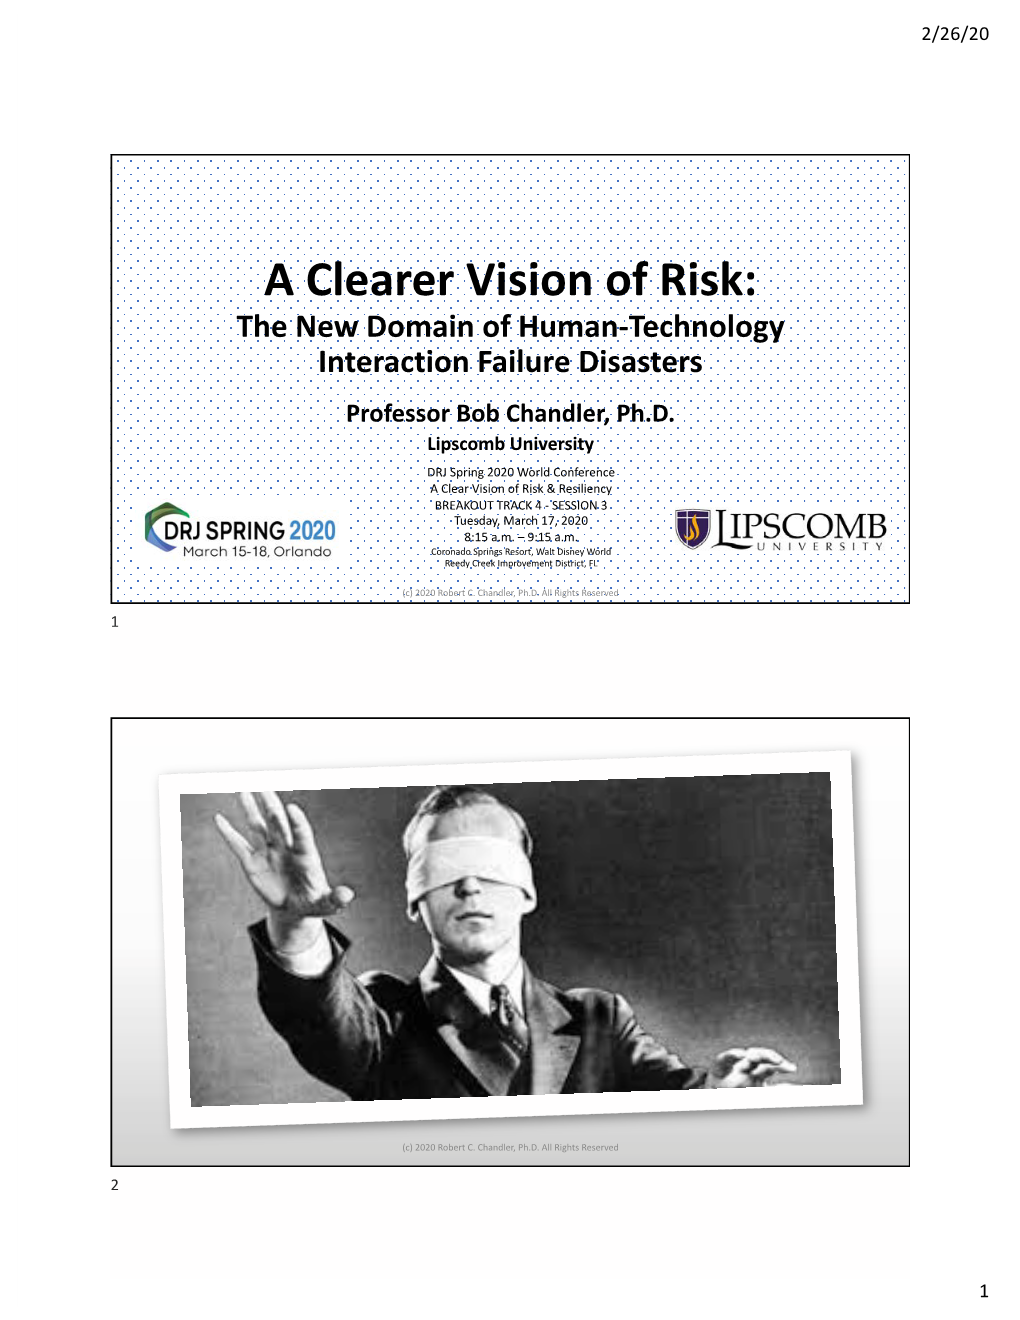 A Clearer Vision of Risk: the New Domain of Human-Technology Interaction Failure Disasters Professor Bob Chandler, Ph.D